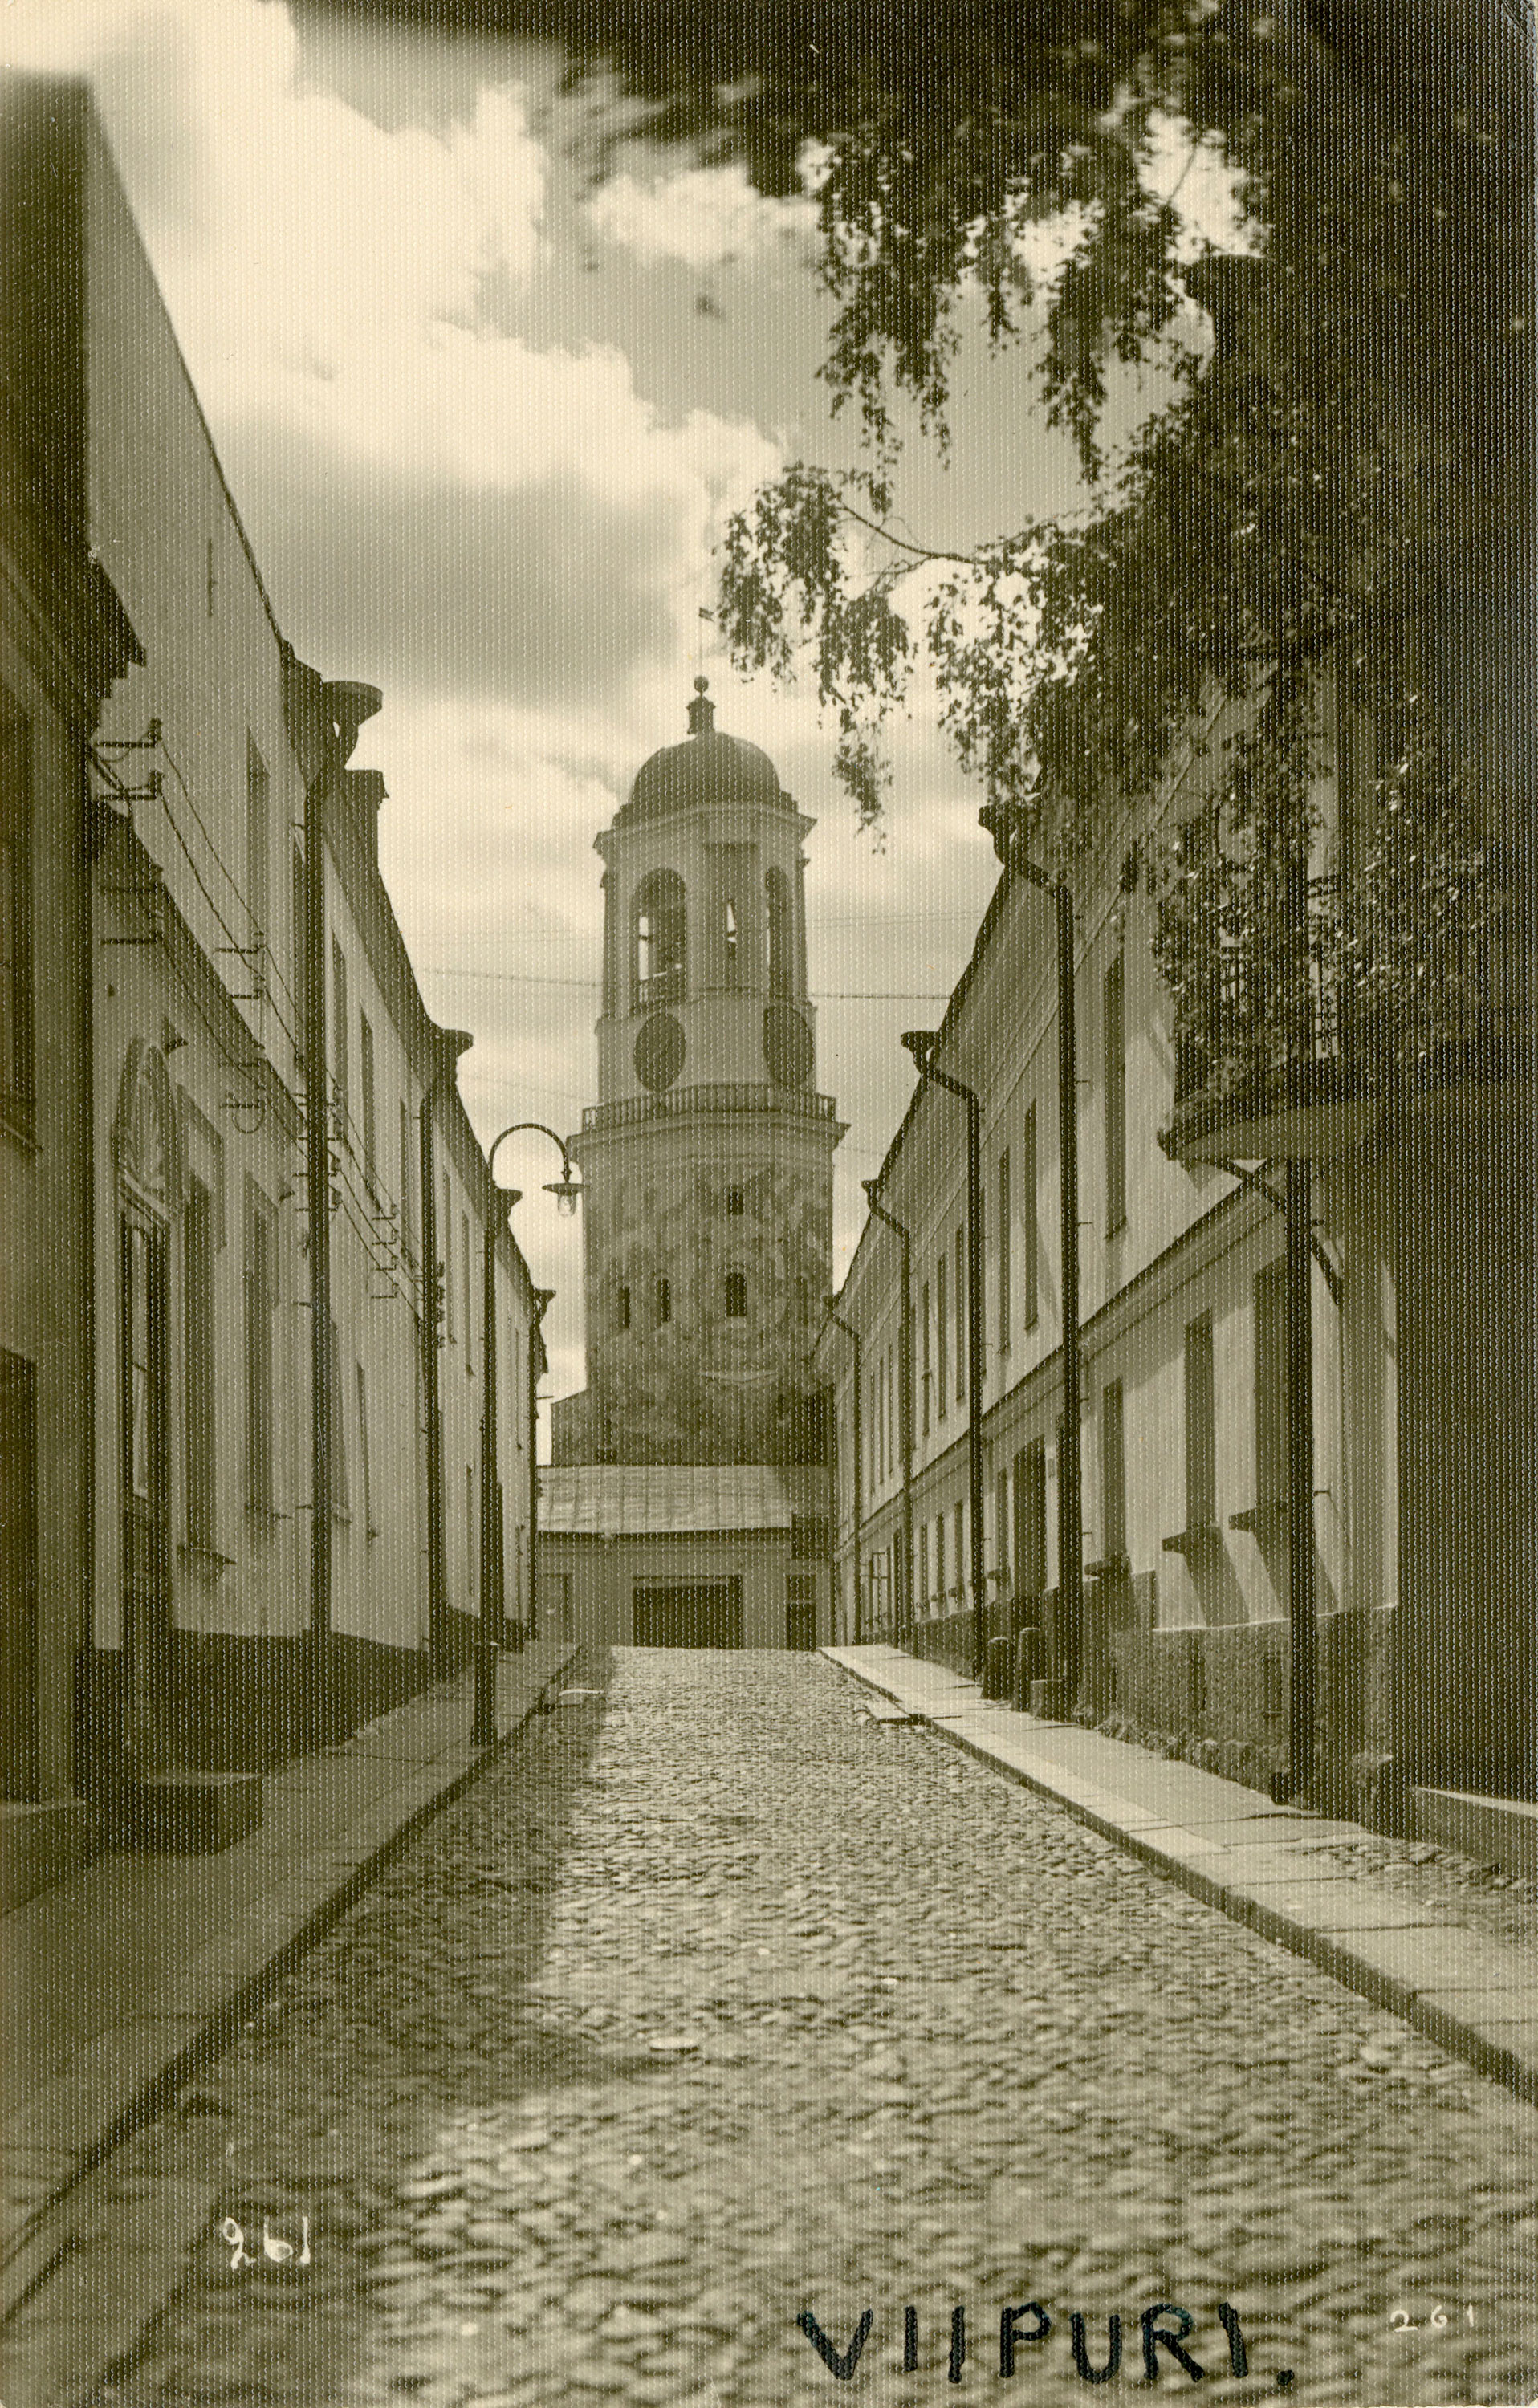 Fig. 2. A postcard showing Vesiportinkatu Street in Viipuri, Finland, the main city in ceded Finnish Karelia (now Vyborg, Russia). Vesiportinkatu Street was voted the most beautiful street in Finland in the 1930s. Images of this street are widely used in Finnish publications. Image: Finnish Post Office Museum (Postimuseo).